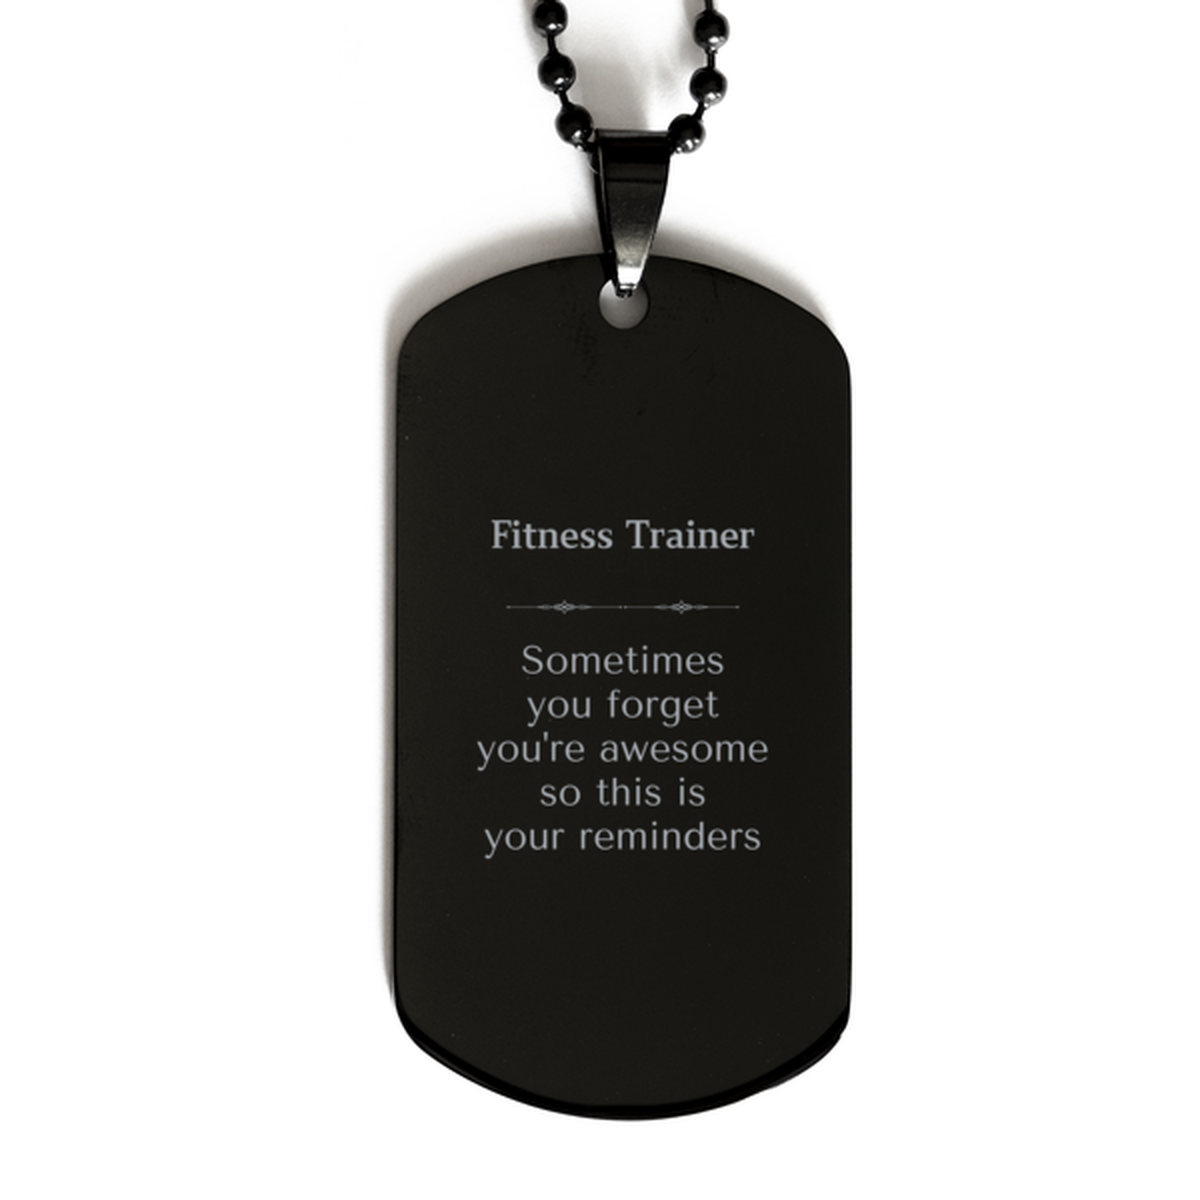 Sentimental Fitness Trainer Black Dog Tag, Fitness Trainer Sometimes you forget you're awesome so this is your reminders, Graduation Christmas Birthday Gifts for Fitness Trainer, Men, Women, Coworkers